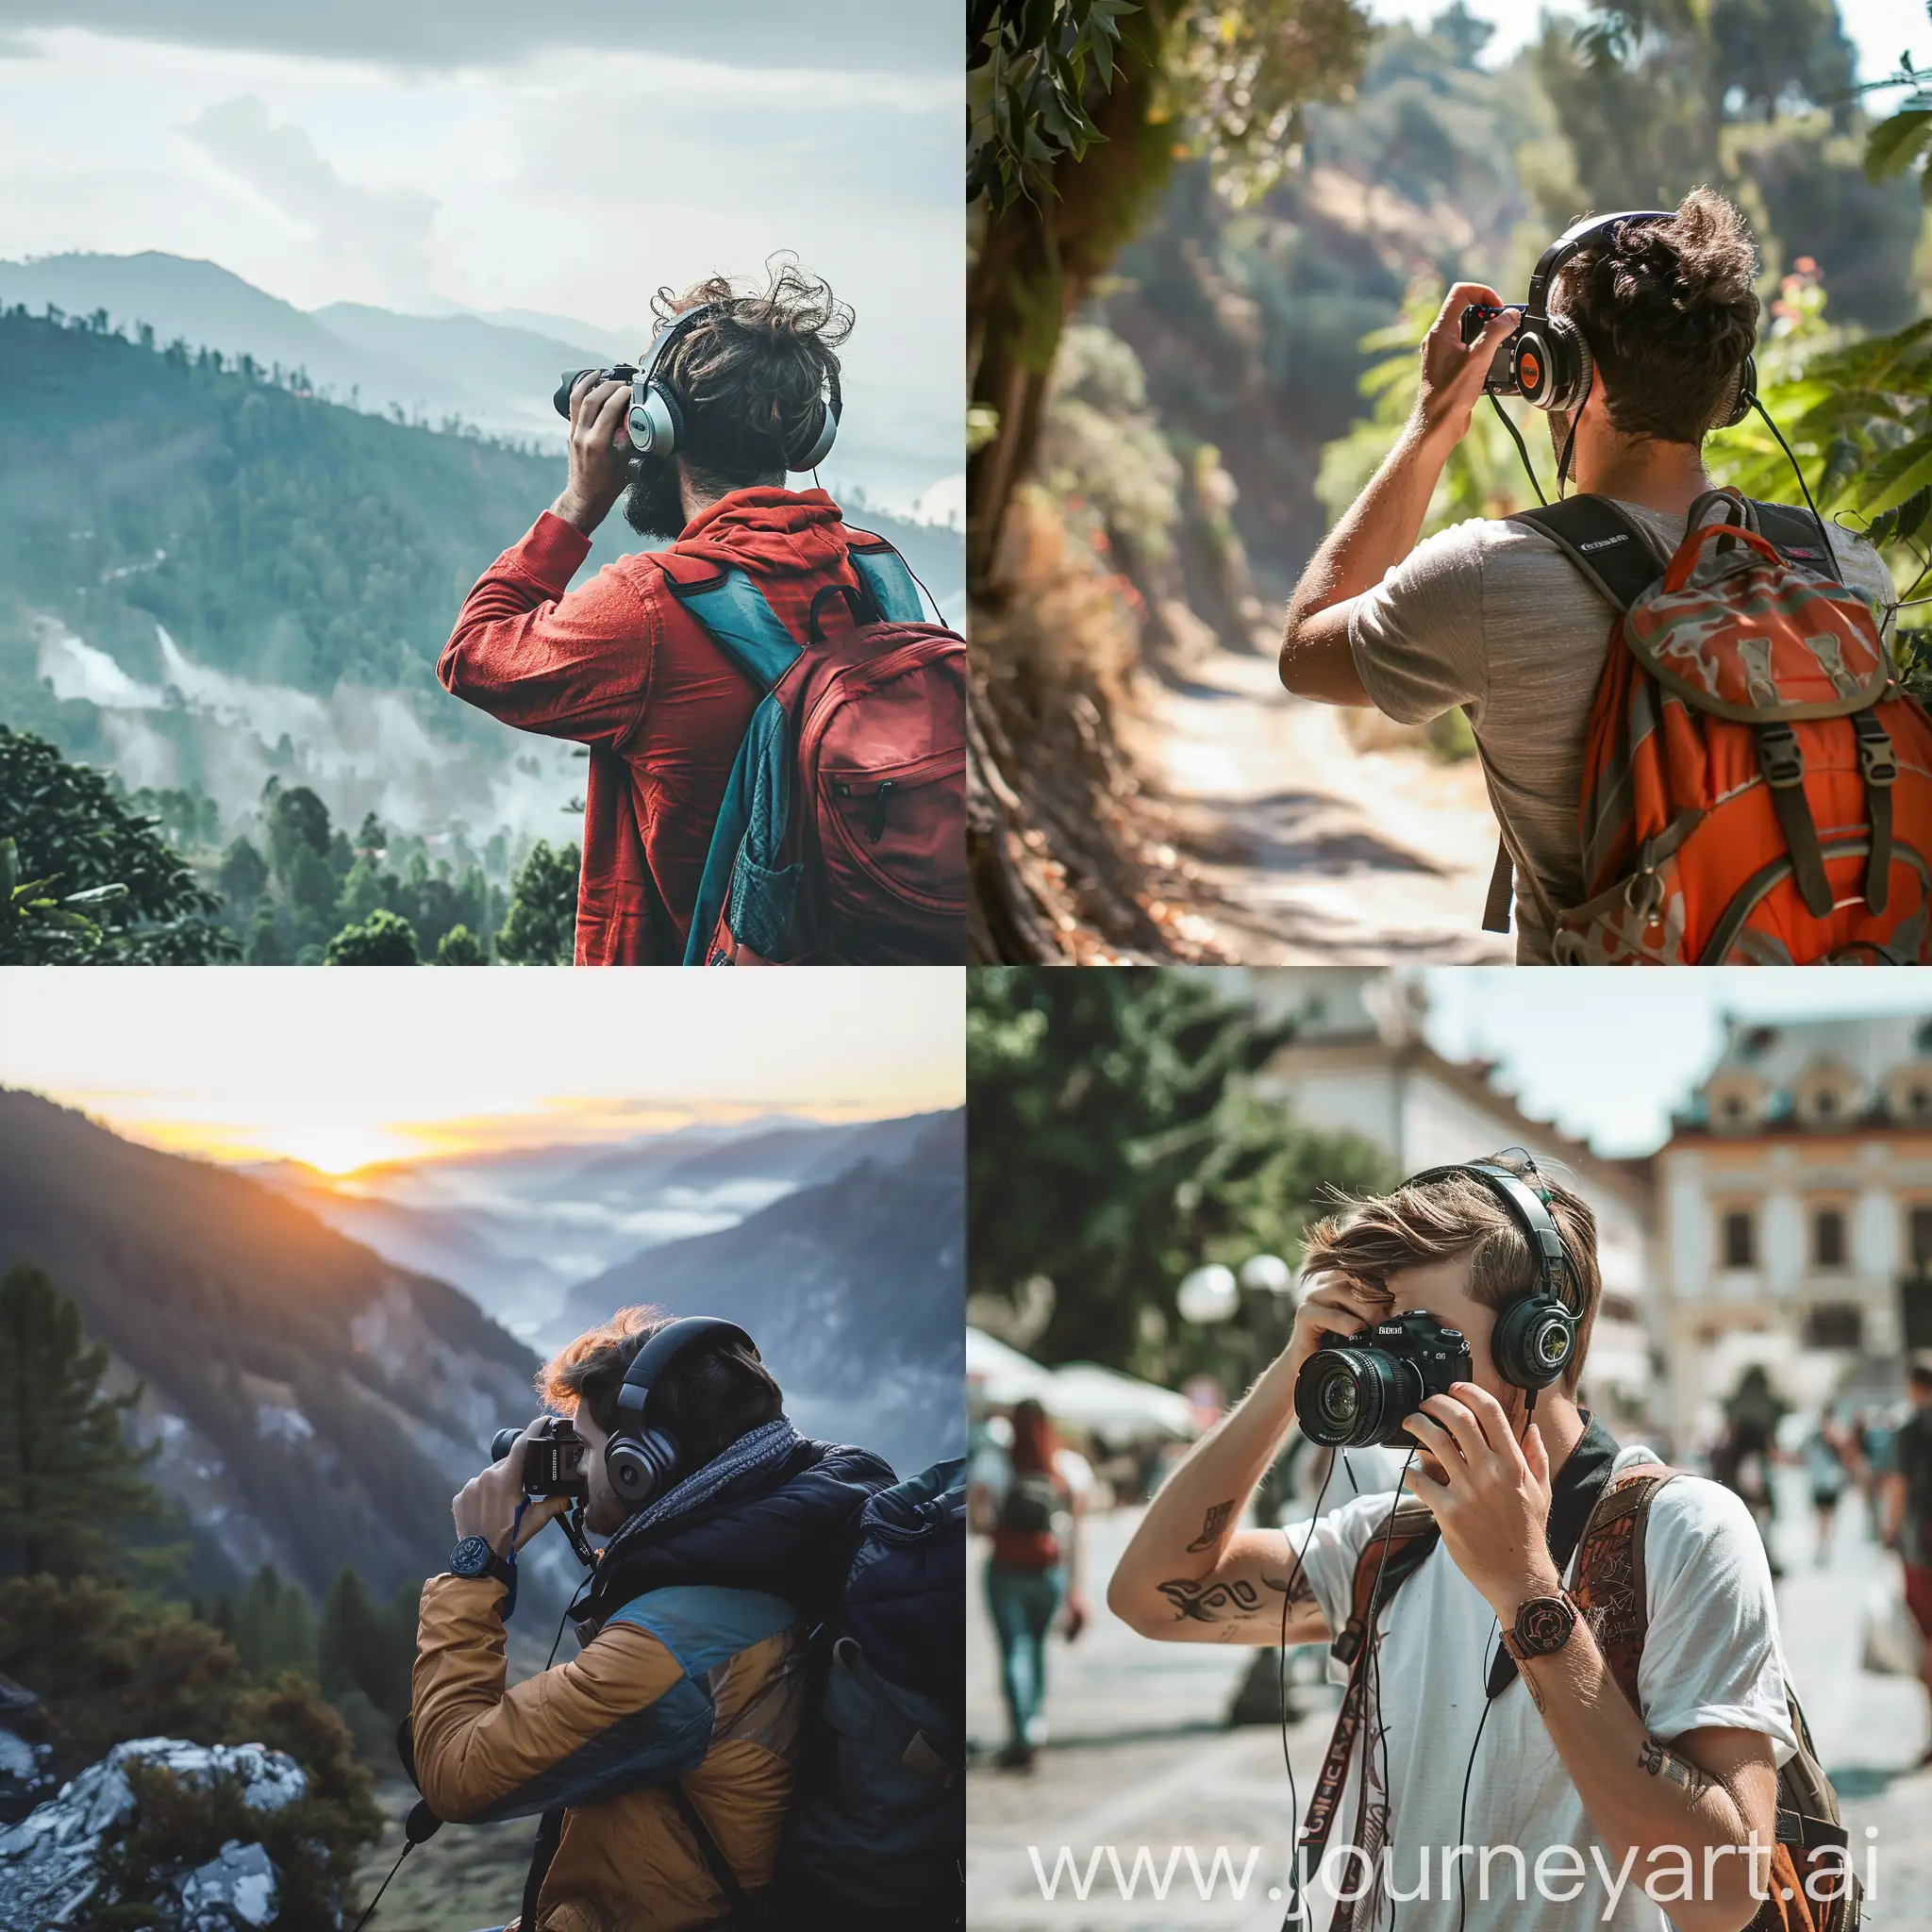 Traveler-Man-with-Headphones-and-Camera-Capturing-Scenic-Beauty